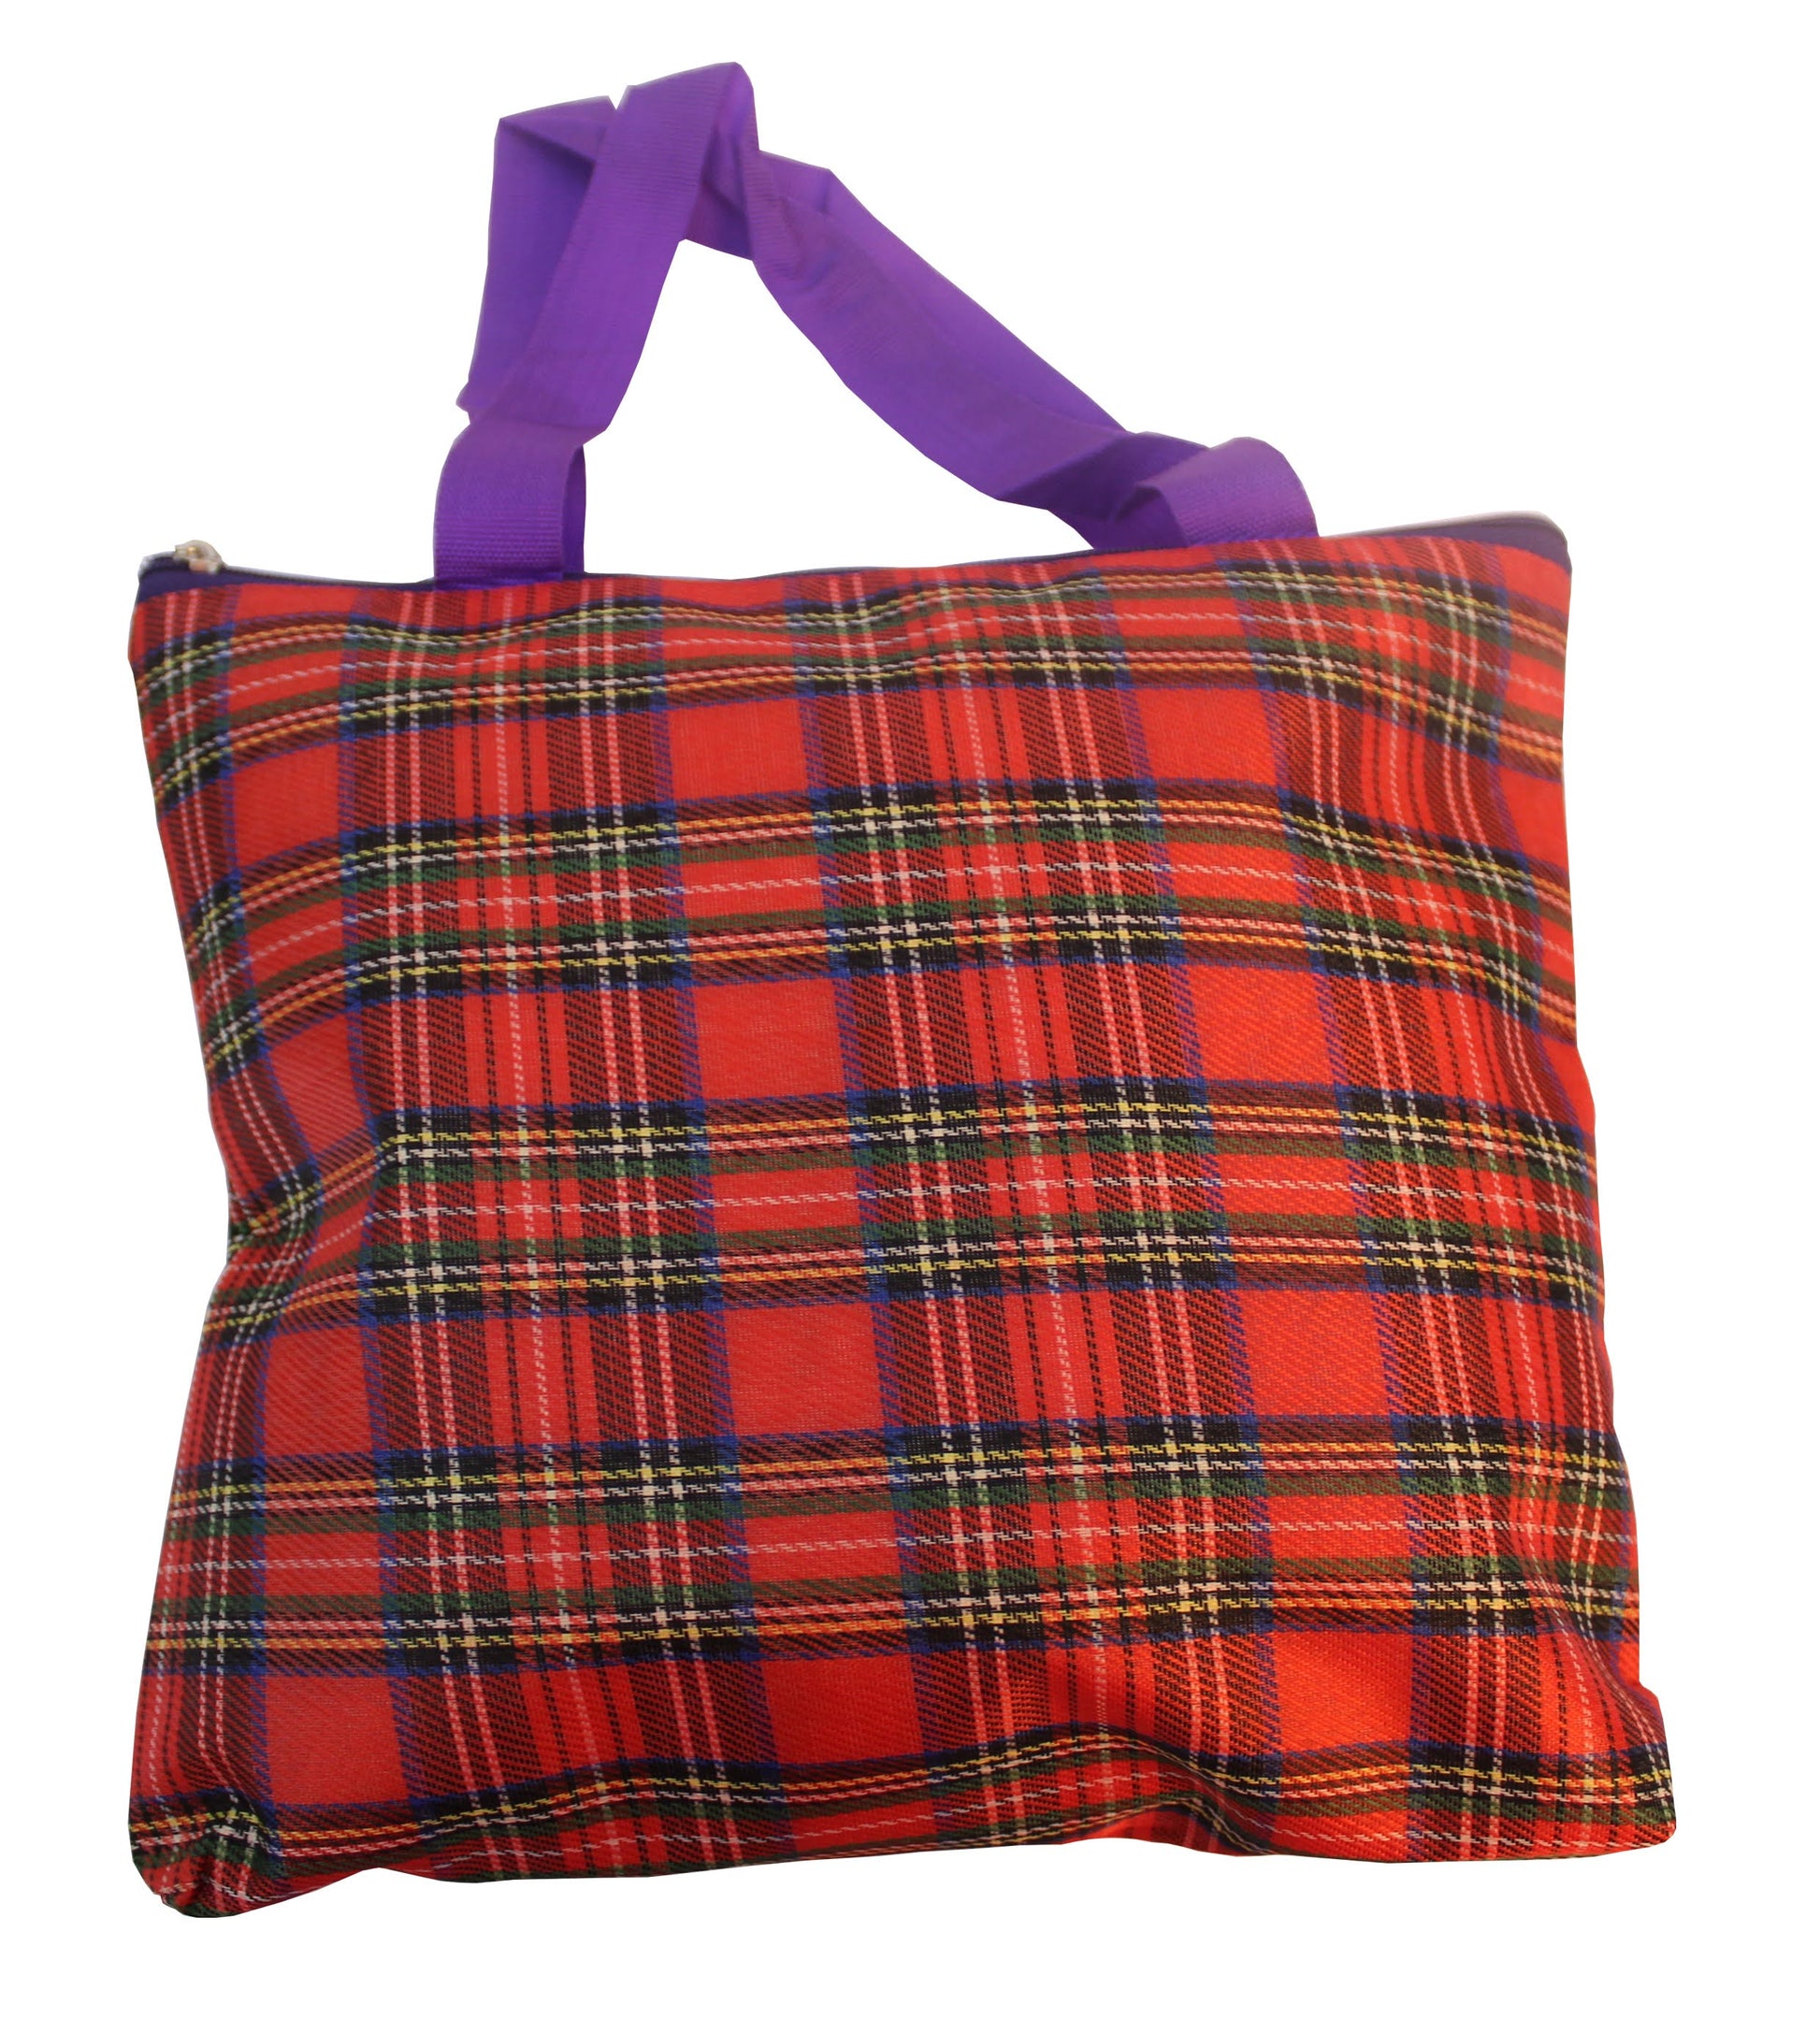 Indian Petals Imported Durable Canvas Printed multi purpose Bag with handles for girls and ladies, Theme Scottish Checks, Large